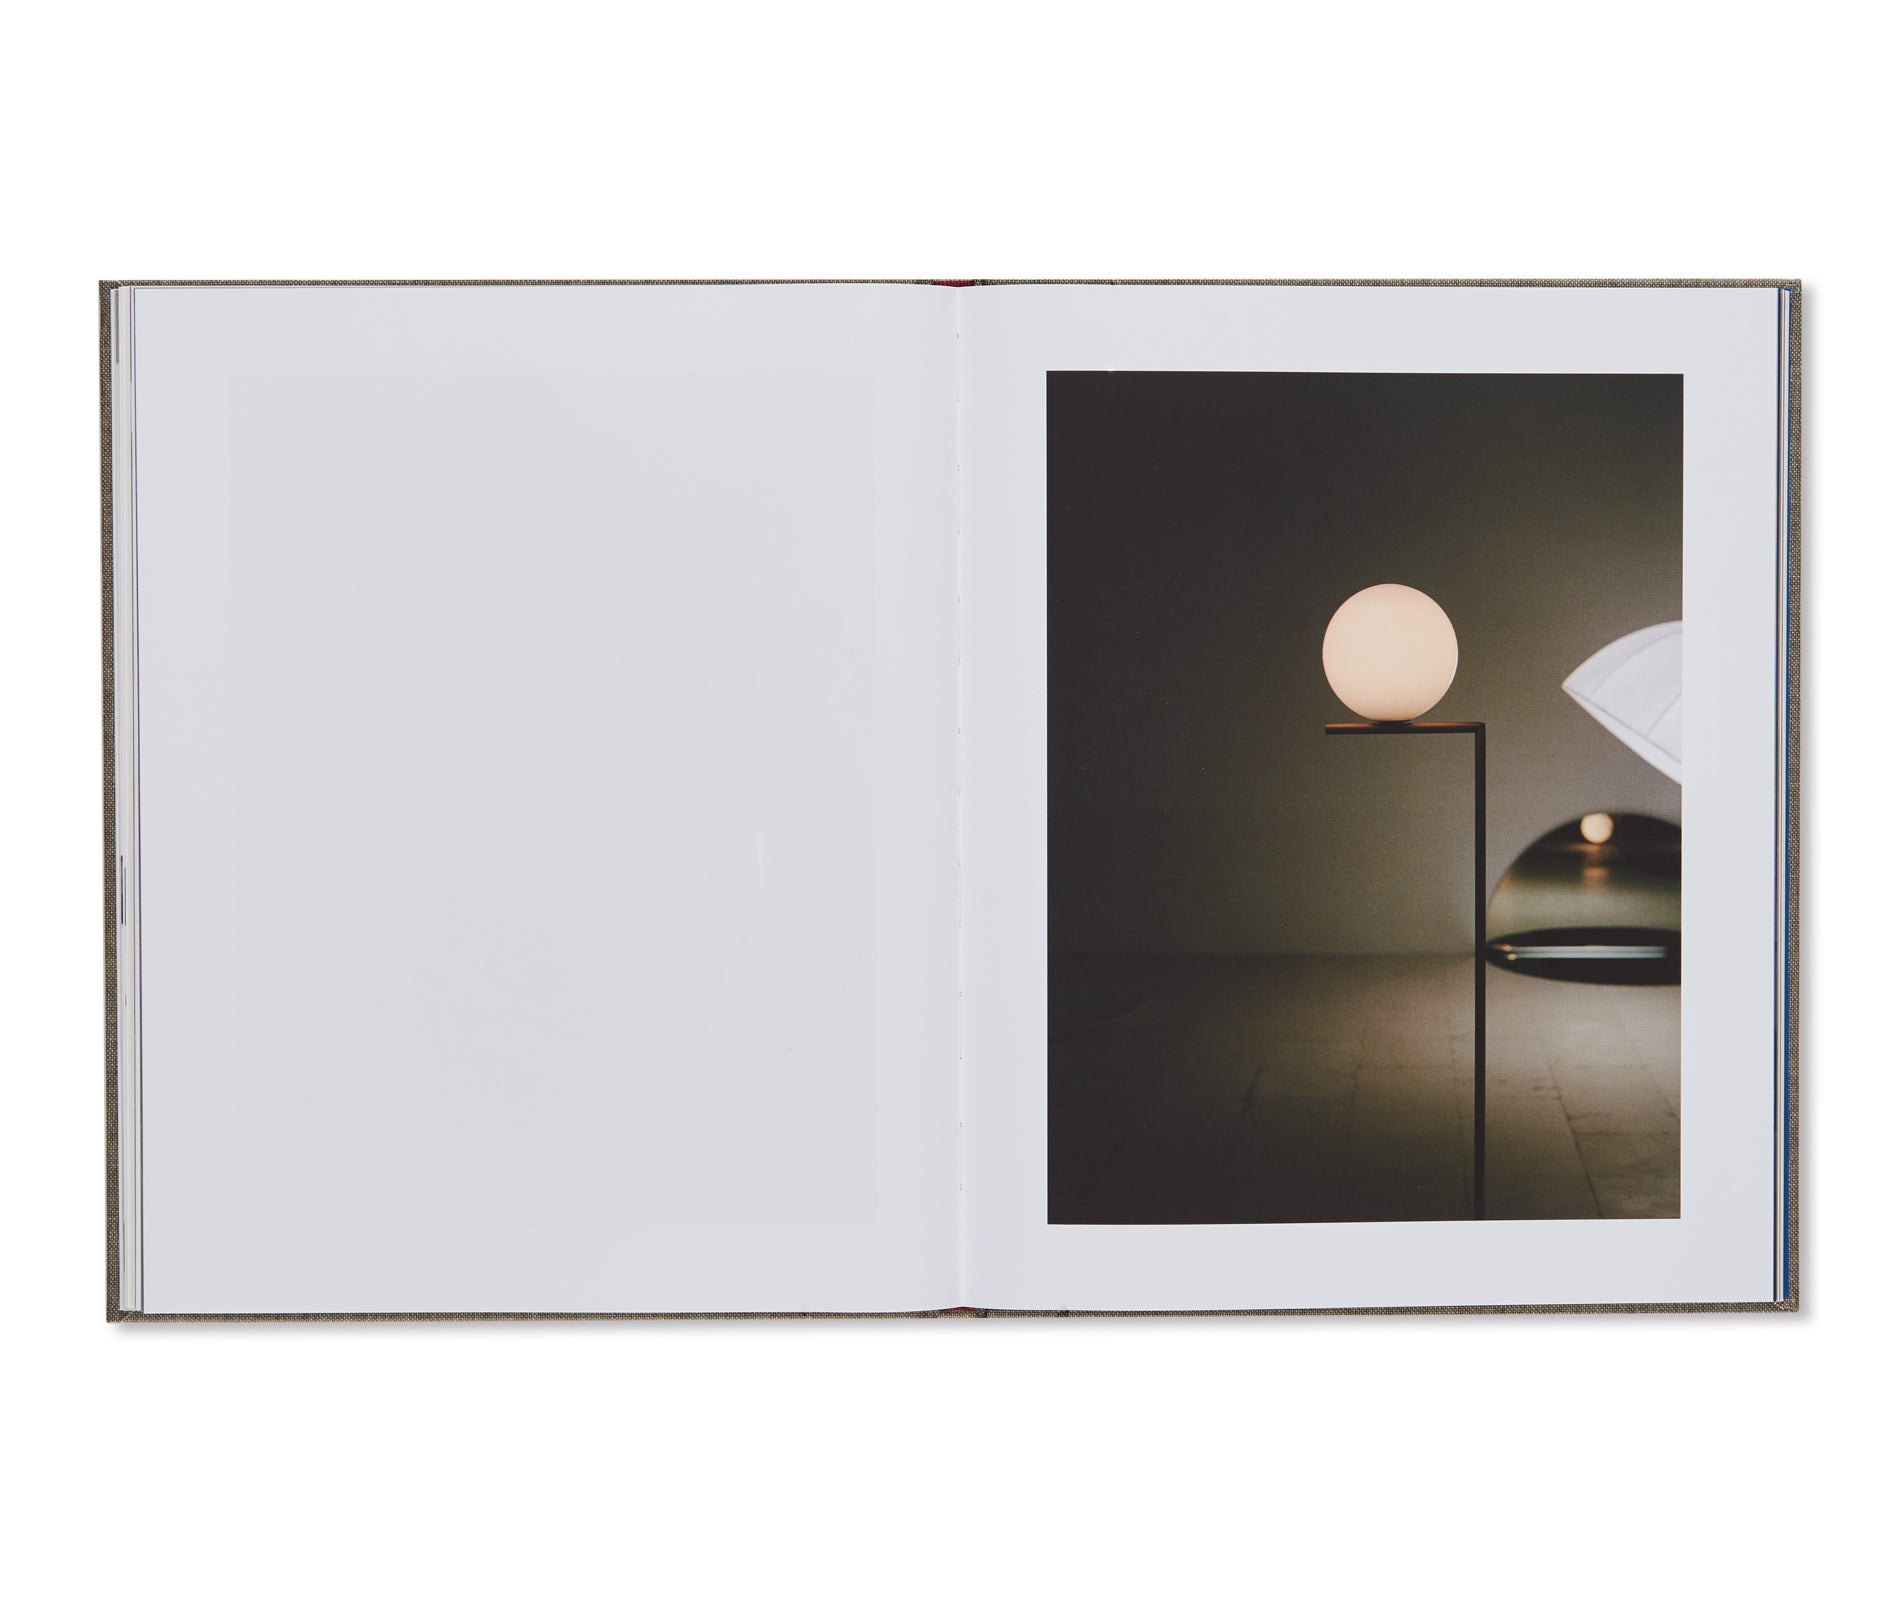 THINGS THAT GO TOGETHER by Michael Anastassiades